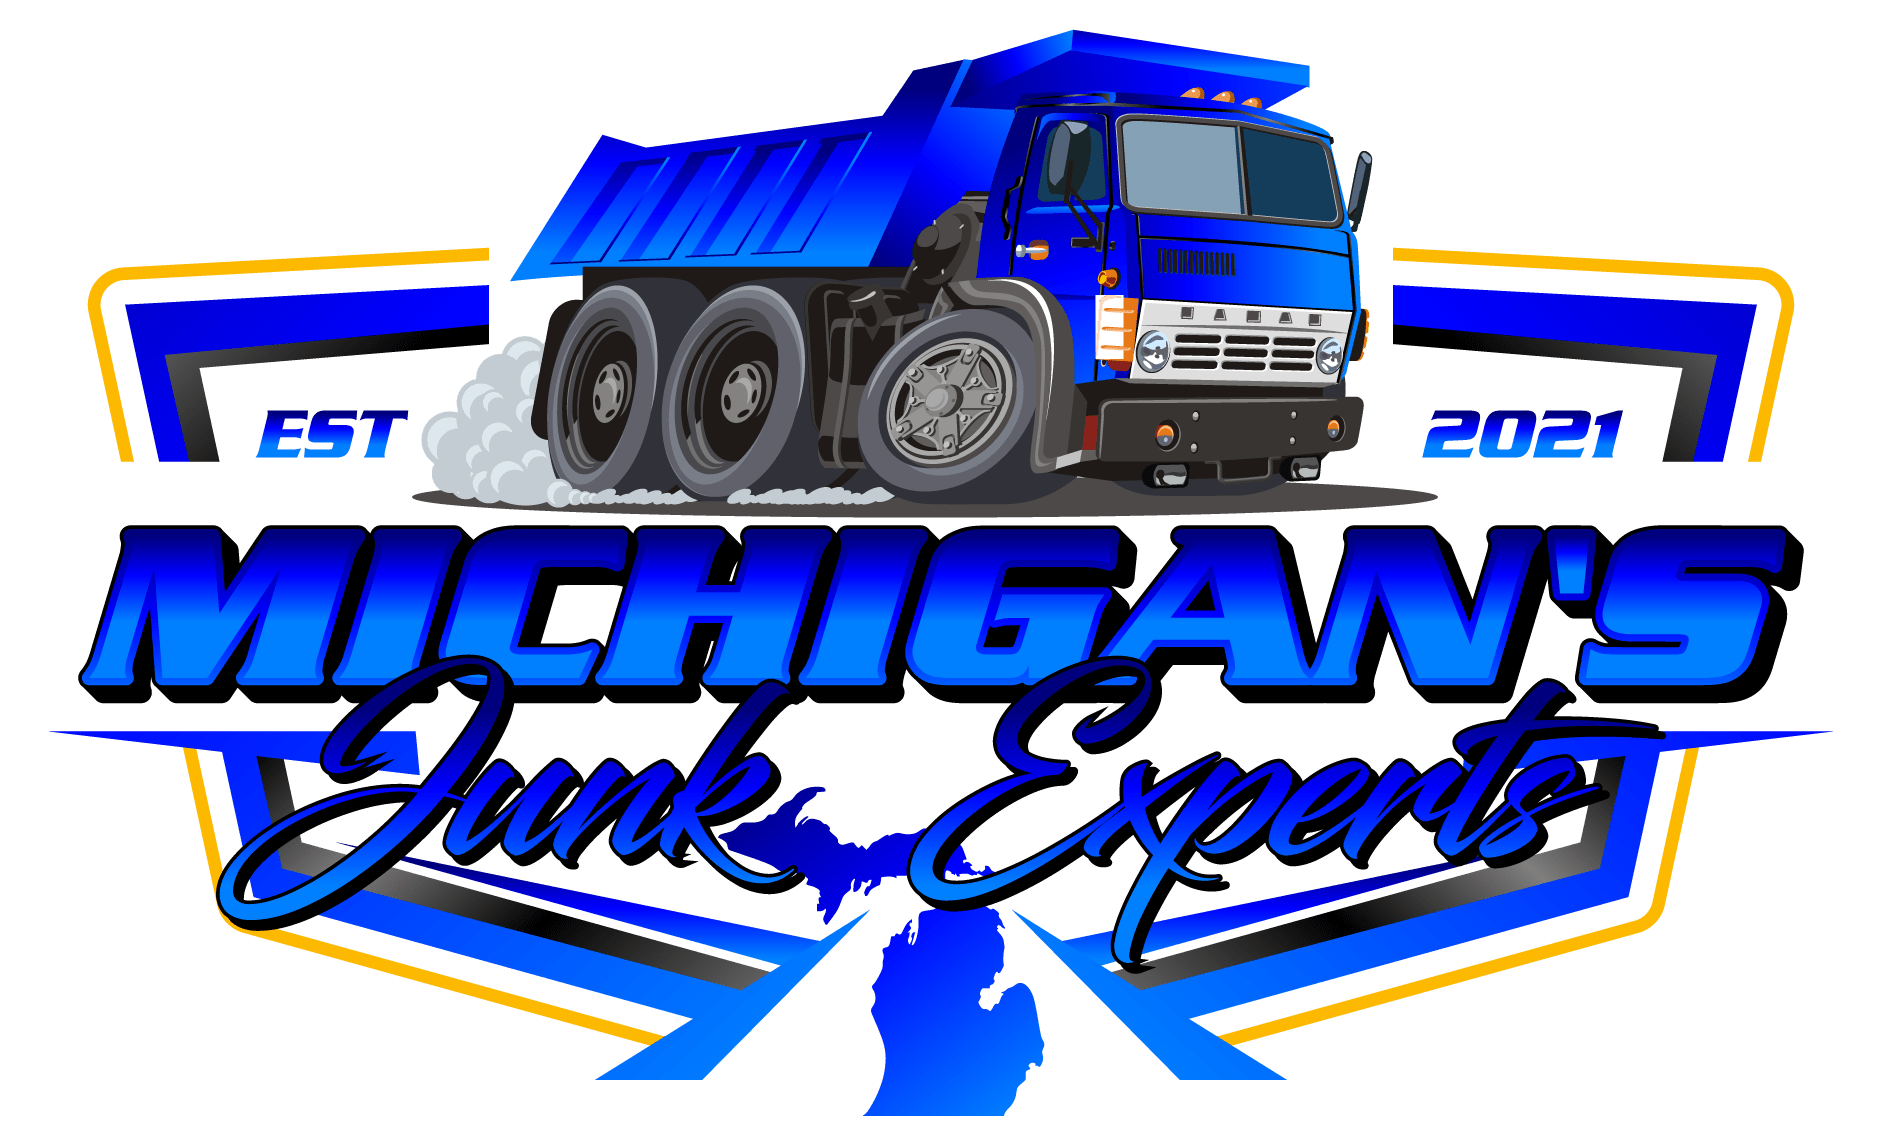 Expert Junk Removal Union City & Union County